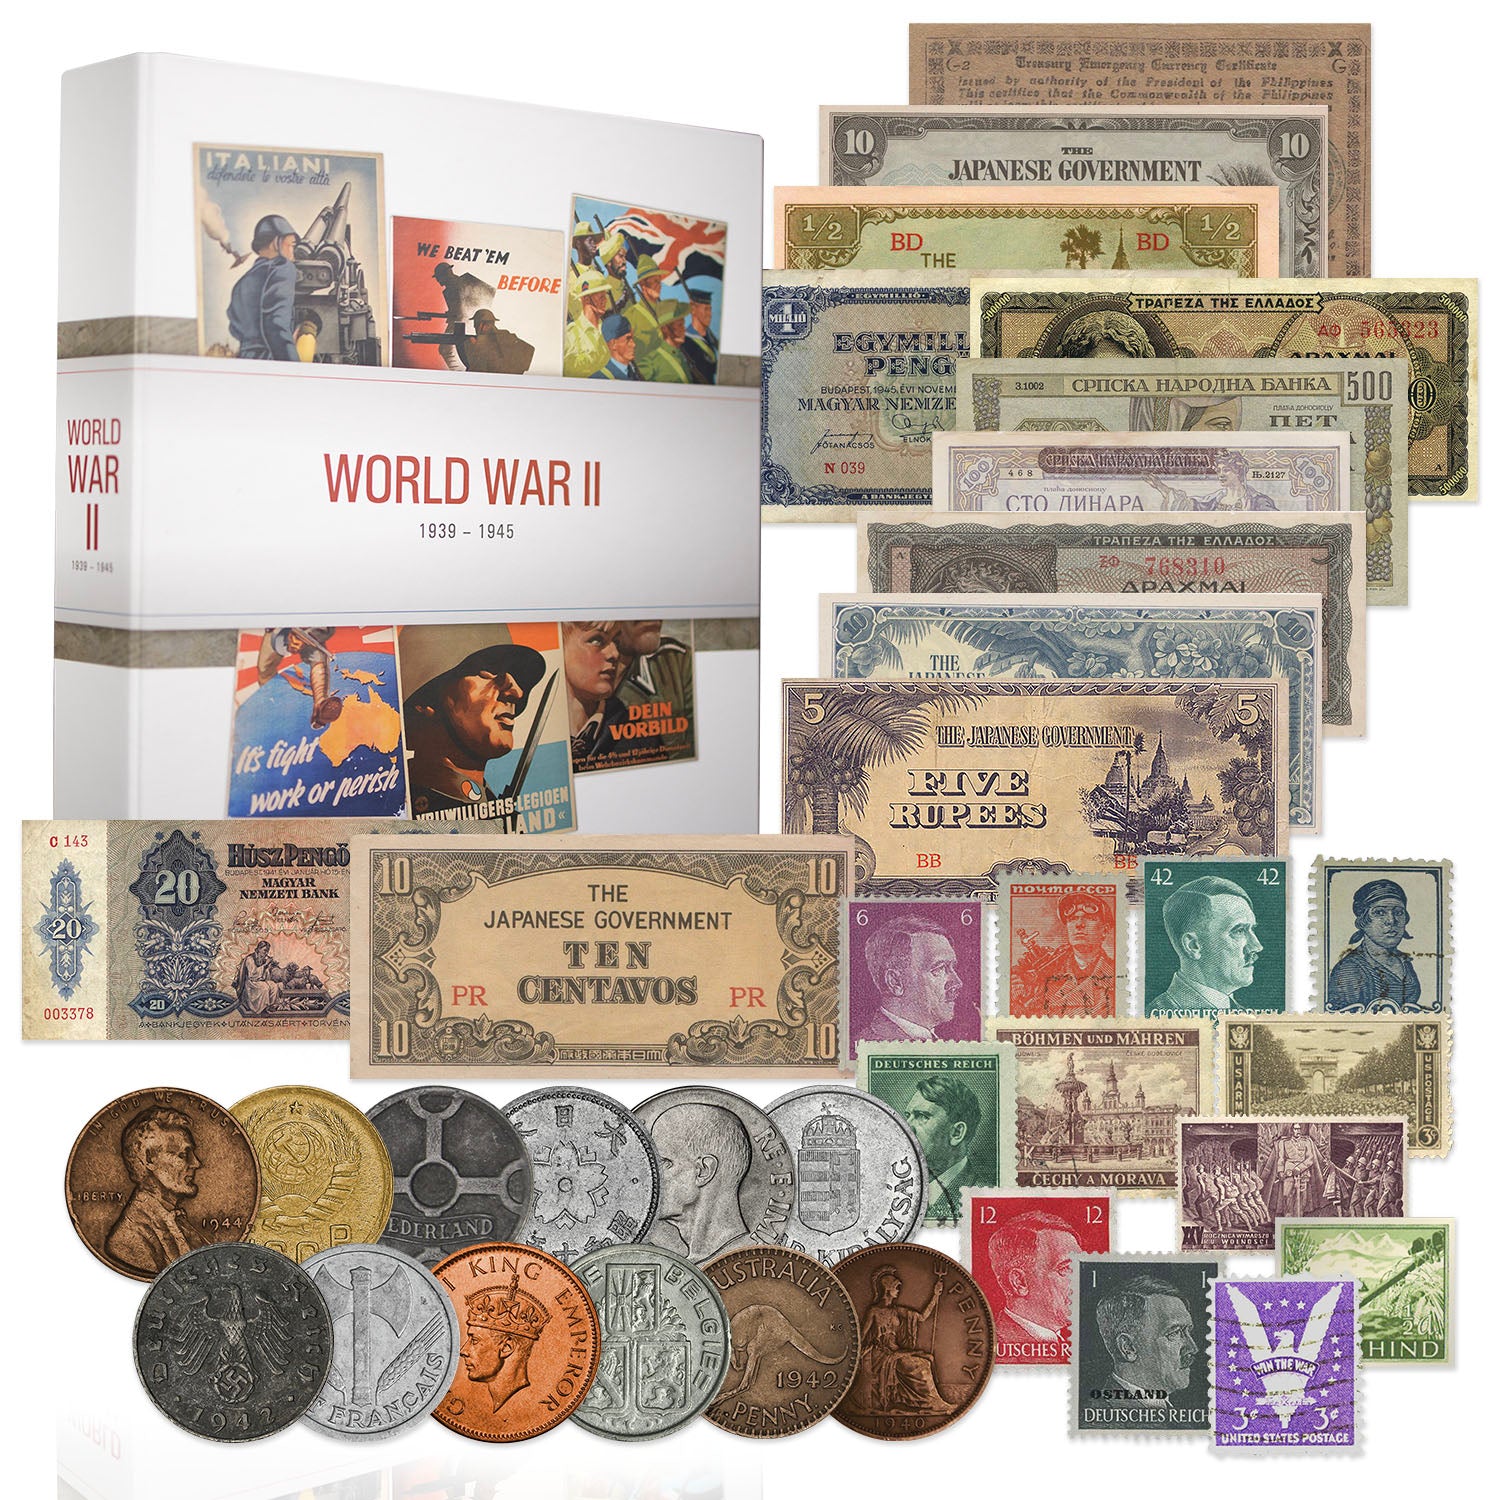 The WWII Historical Artefacts Collector Edition